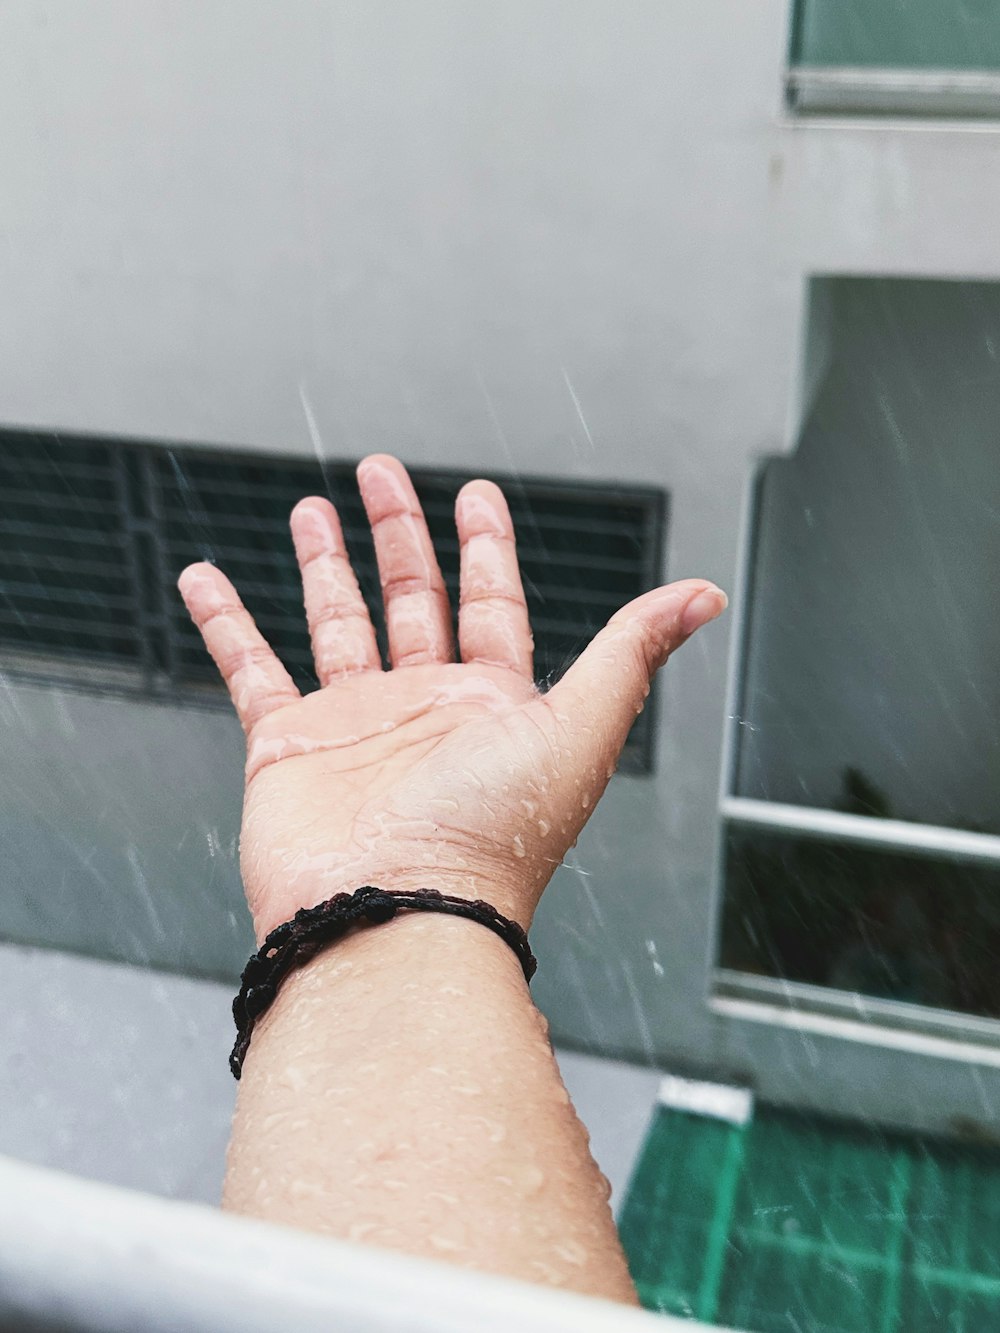 a person's hand reaching out of a window in the rain